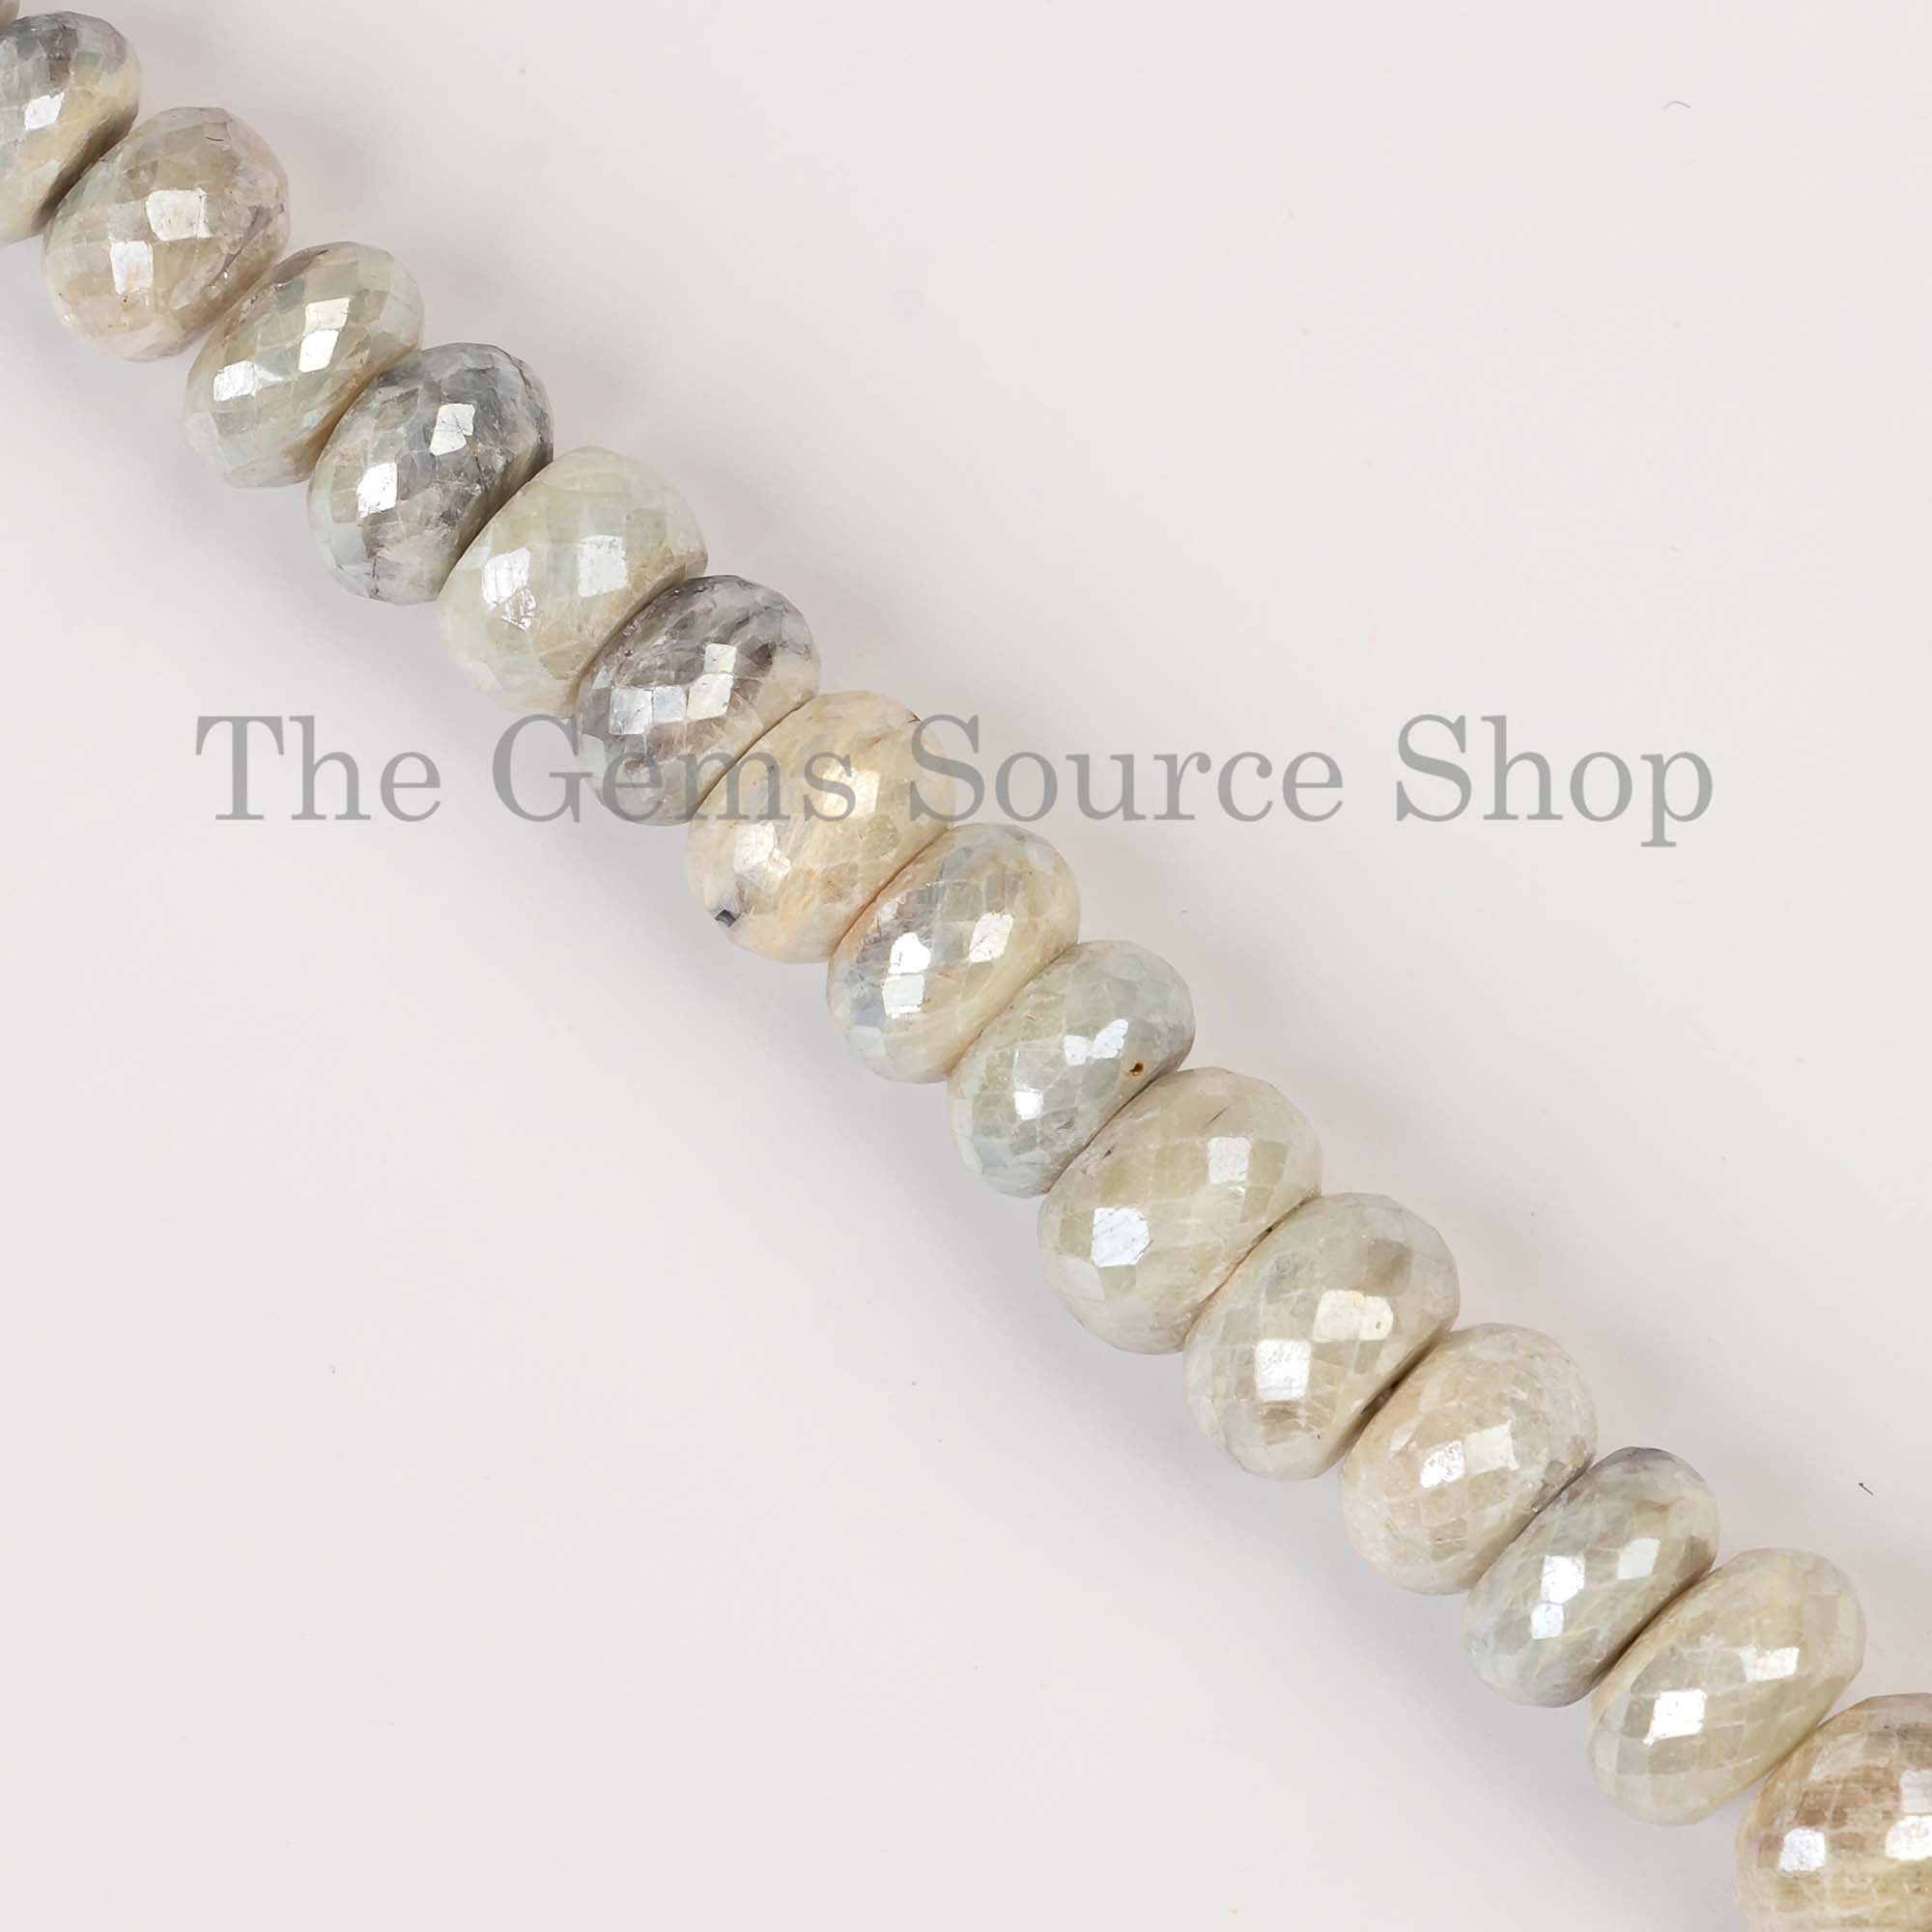 Silverite Coated Sapphire Beads, Coated Sapphire Faceted Beads, Sapphire Rondelle Shape Beads